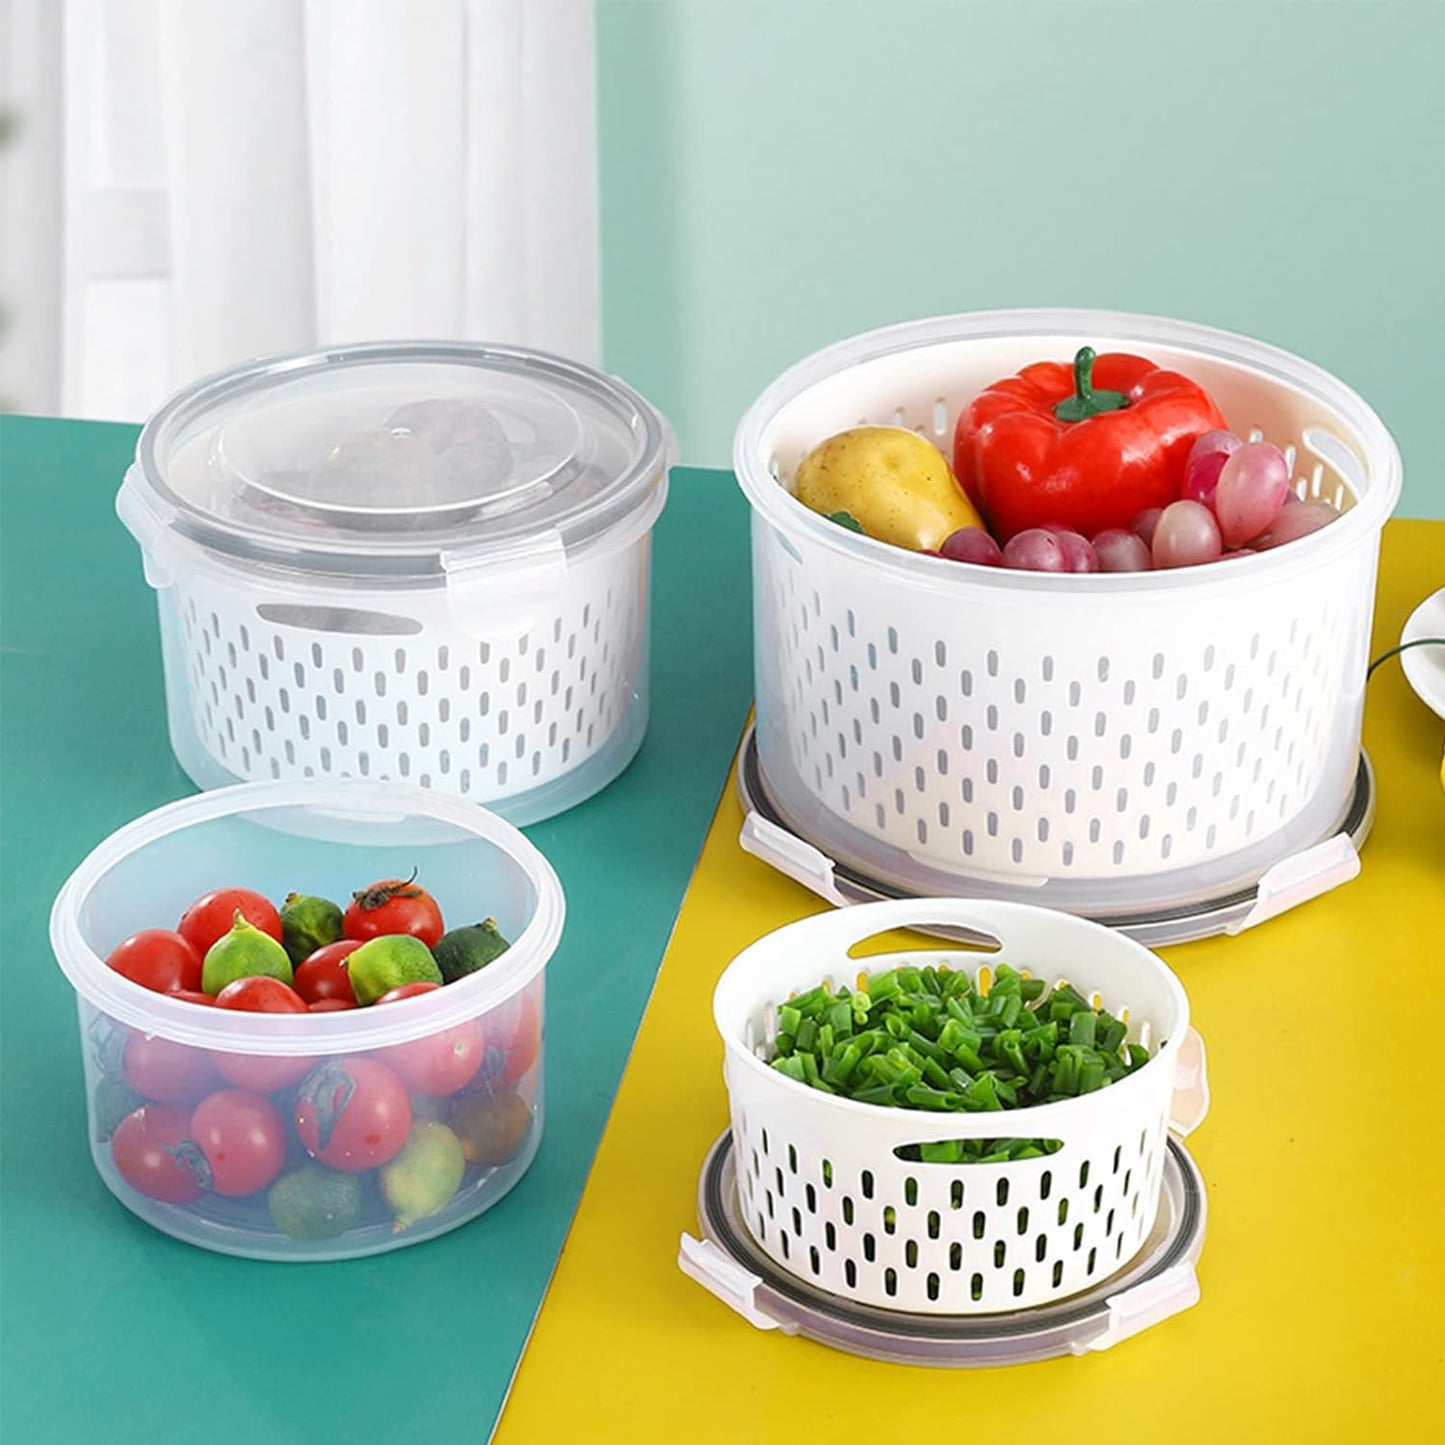 SET OF 3 Vegetable Storage Container